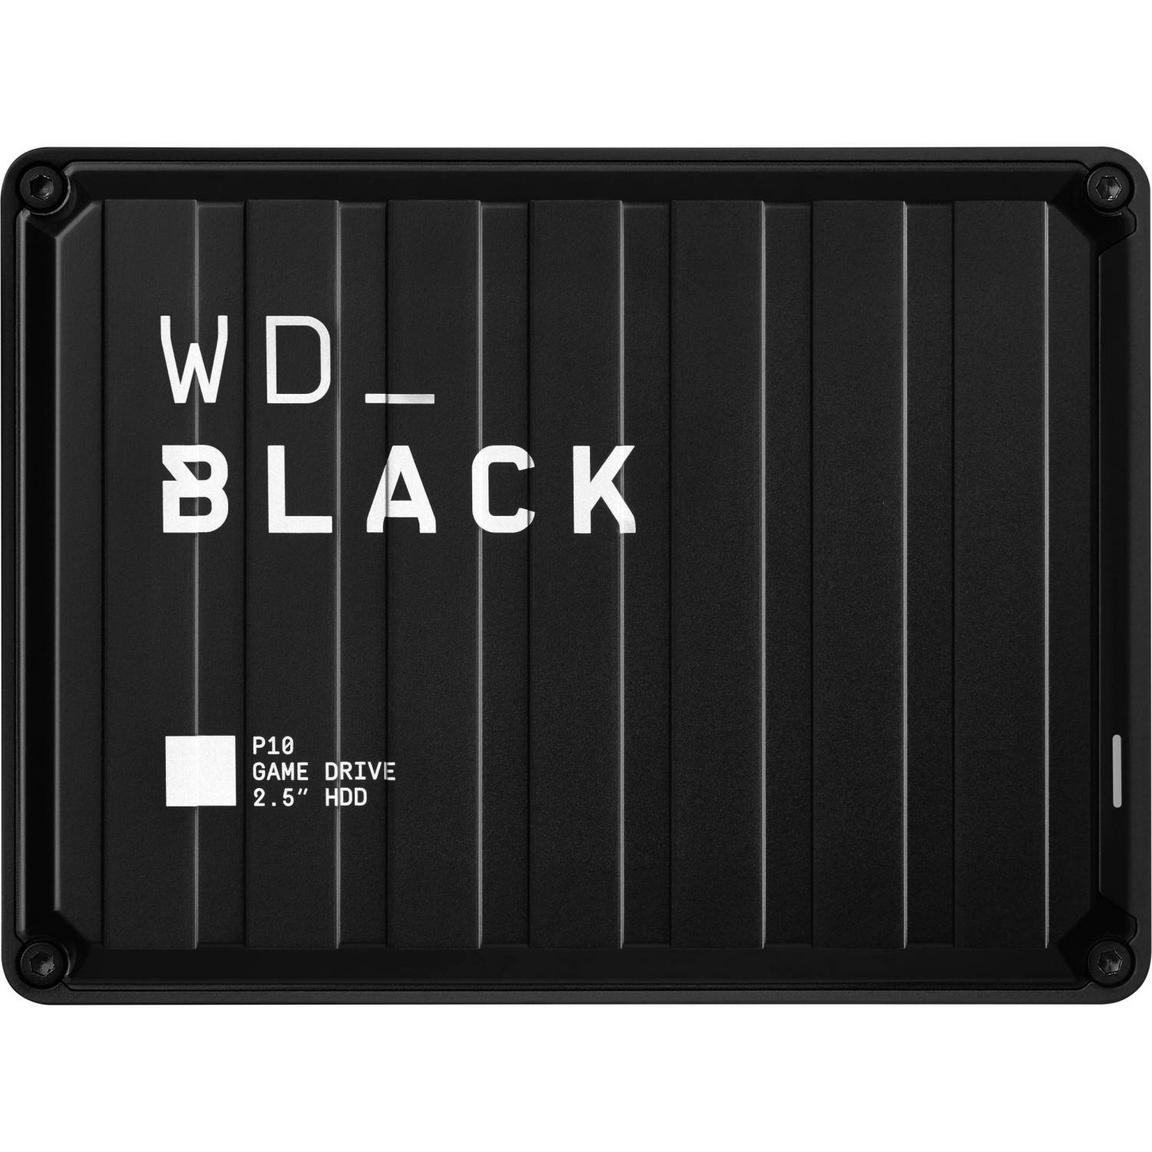 Gamestop -WD_Black P10 2TB Game Drive with Free PC Game Download $59.99 + FS on orders $35+ and More